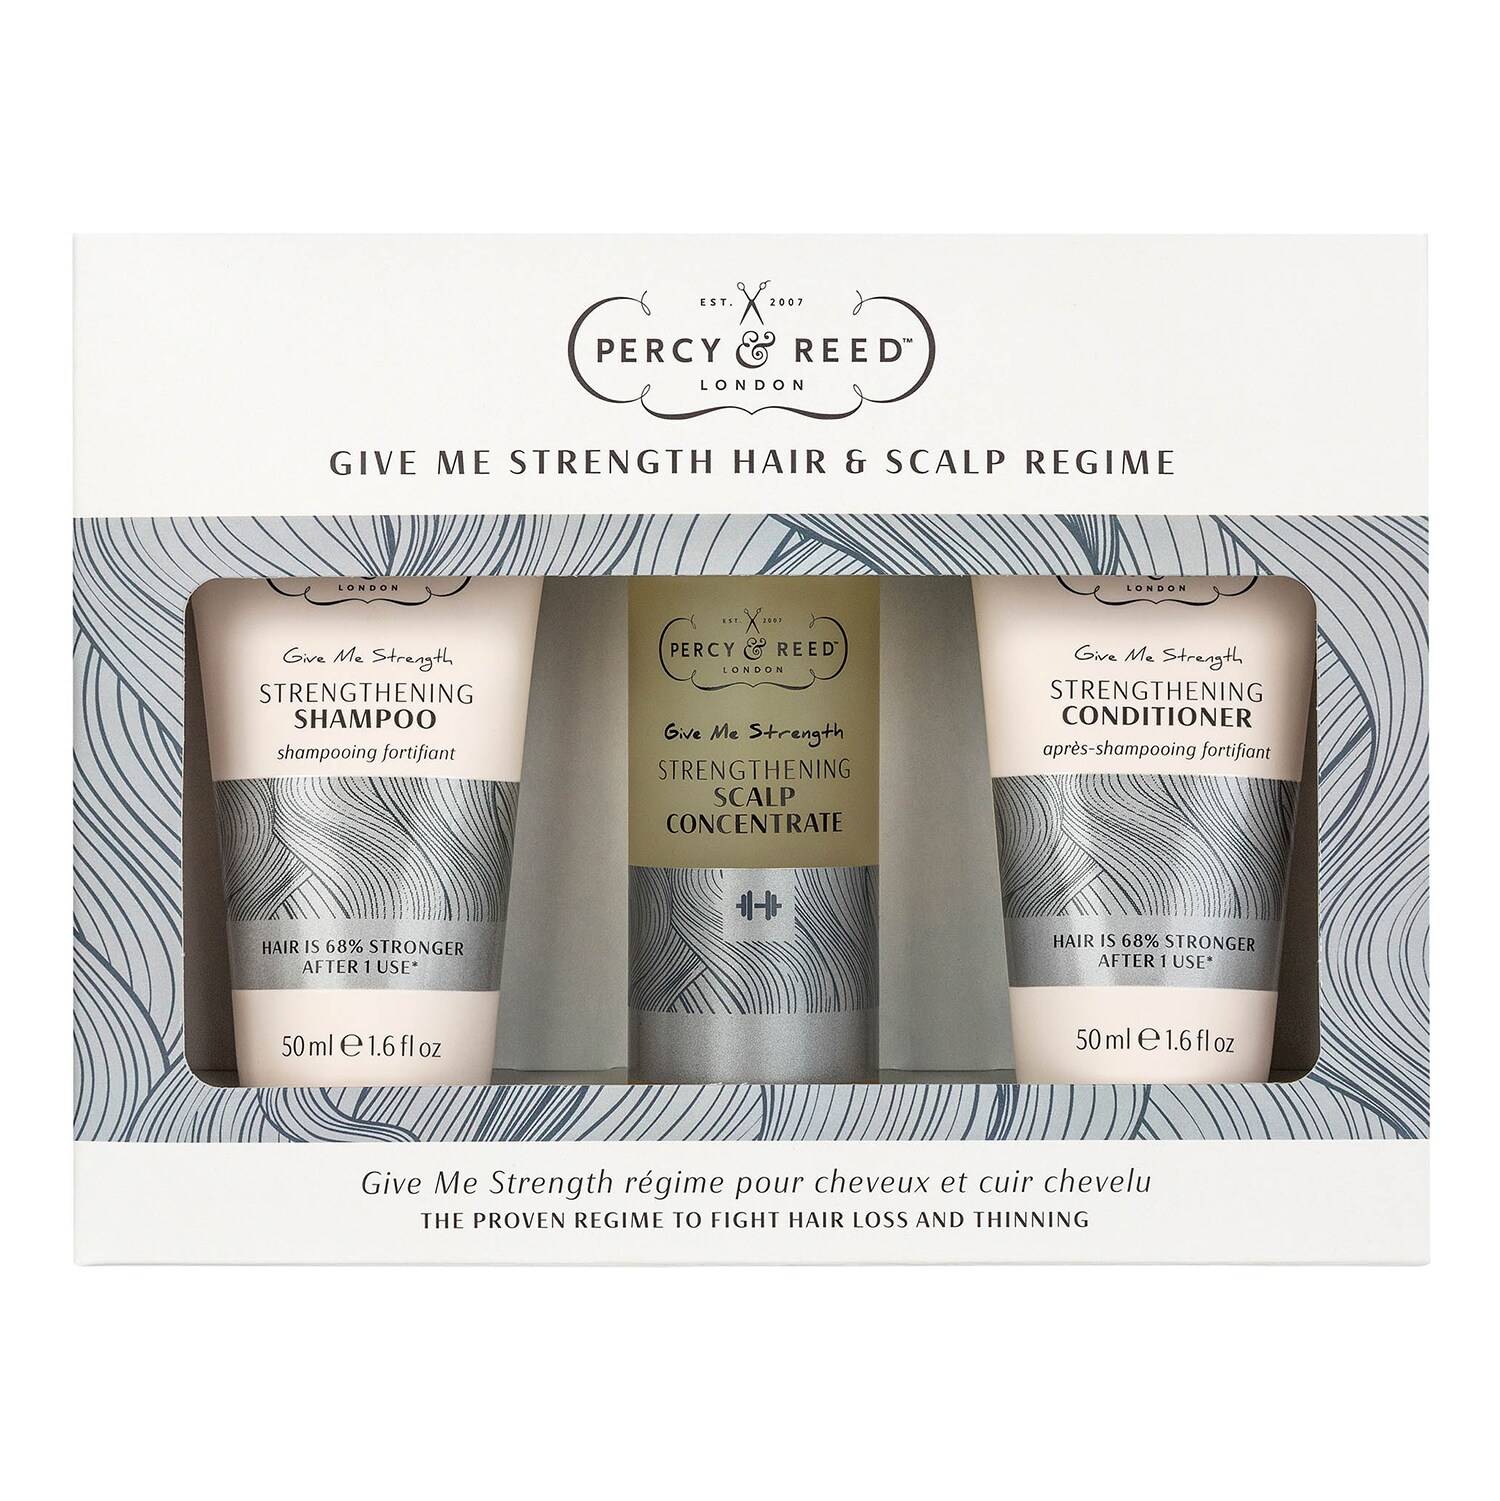 Percy & Reed Percy & Reed Give Me Strength Hair & Scalp Regime Set